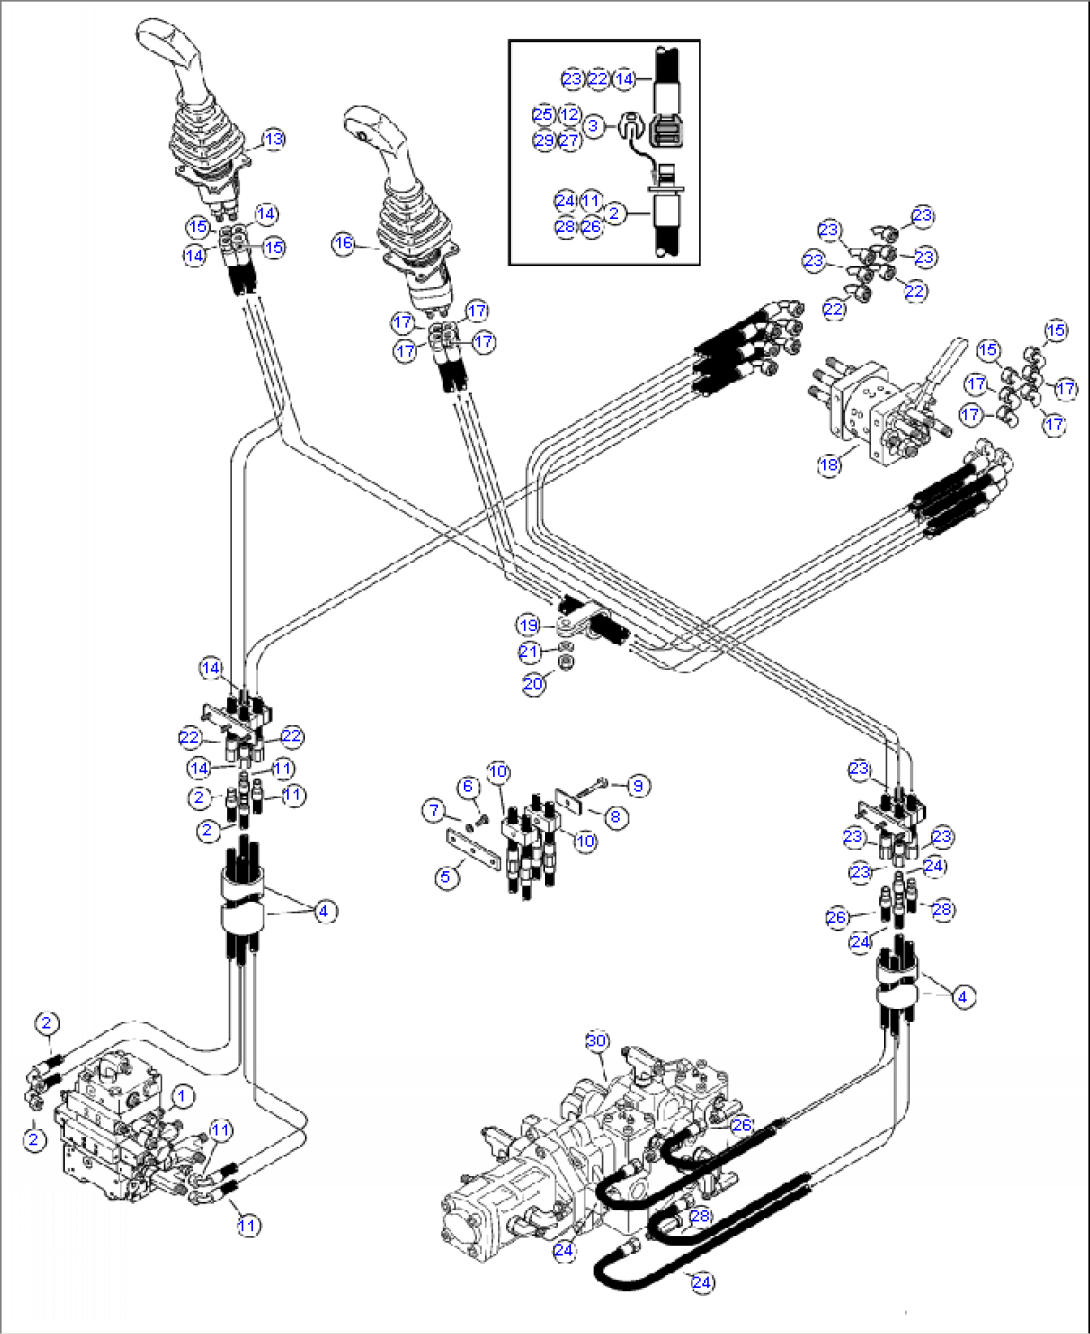 H3010-01A27 HYDRAULIC PIPING - SUPER FLOW PATTERN CHANGE